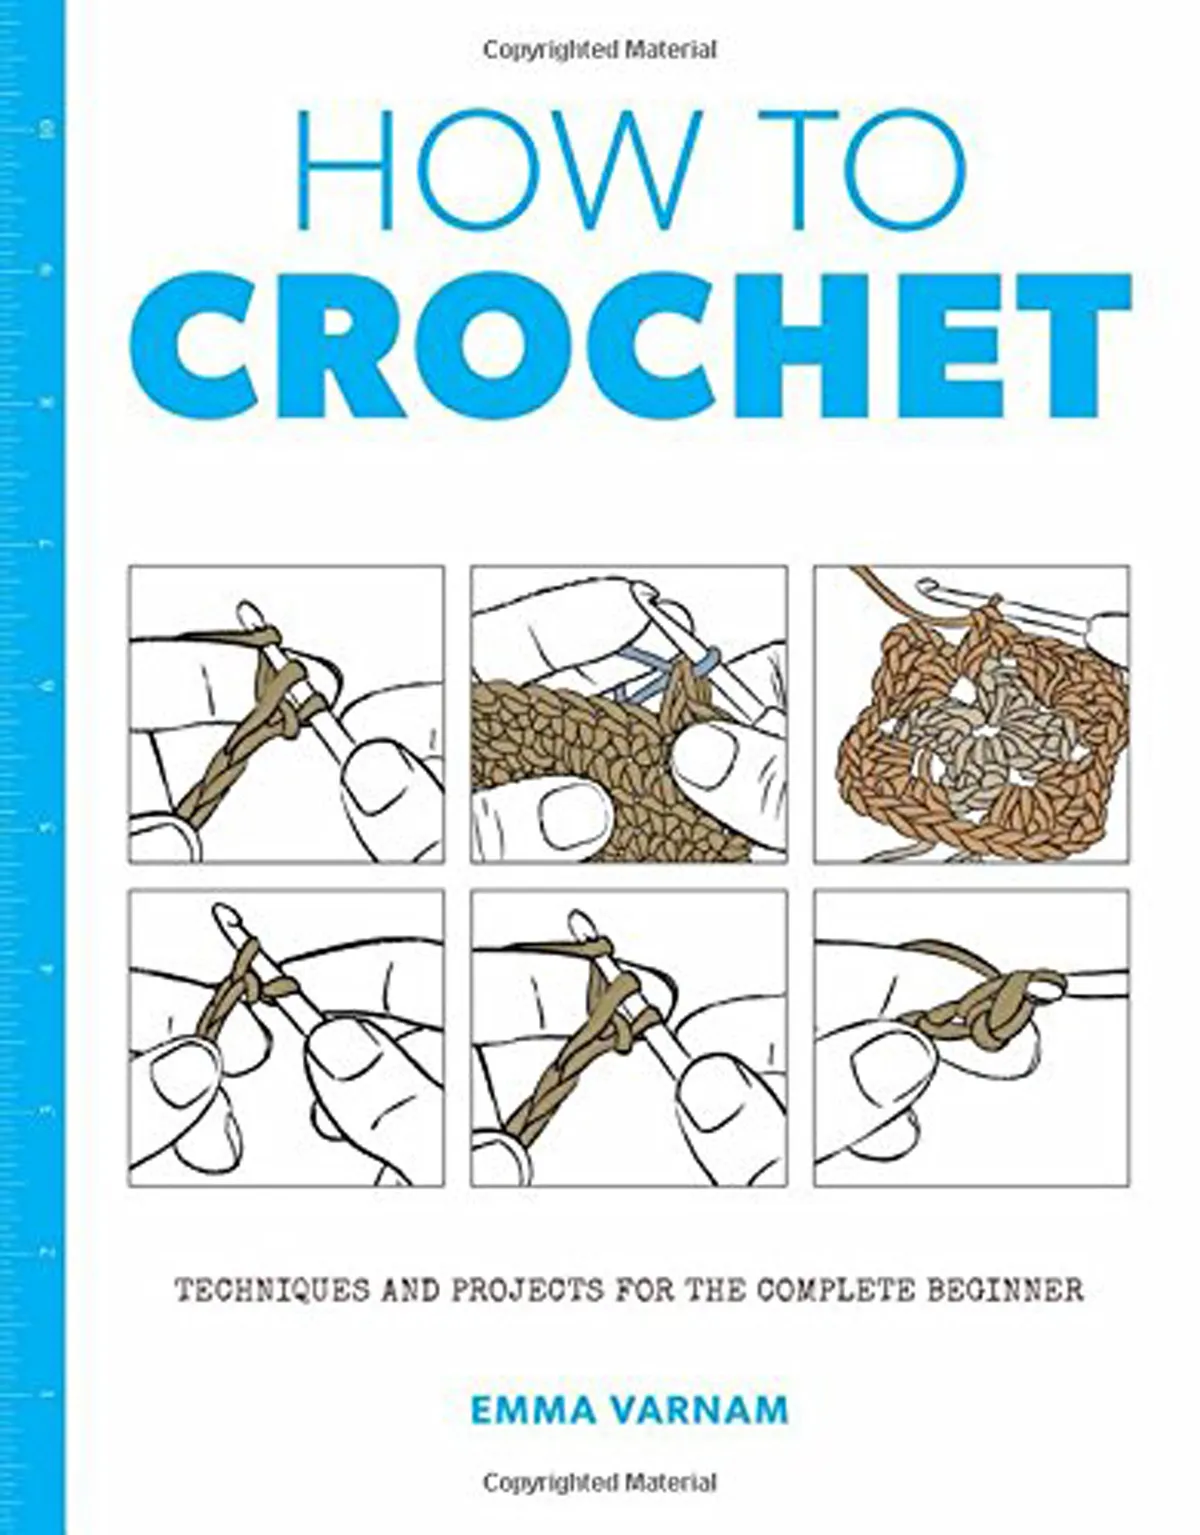 Crochet for Beginners: A Stitch Dictionary with Step-by-Step Illustrations  and 10 Easy Projects